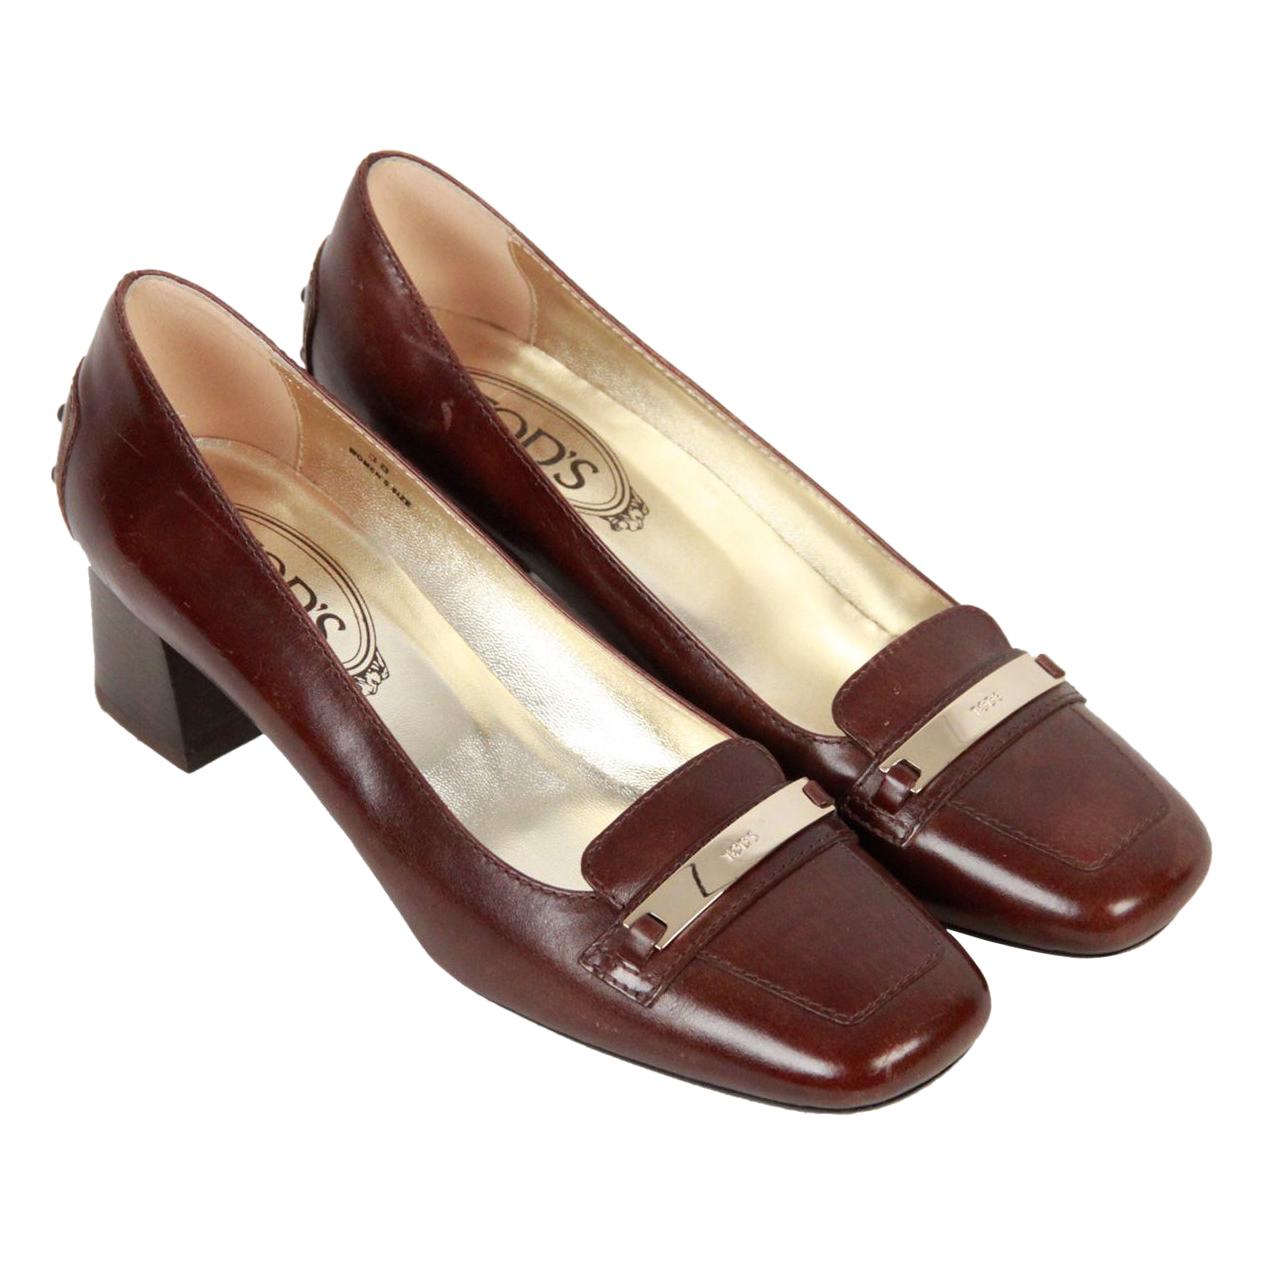 TOD'S Brown Leather SLIP ON PUMPS Shoes HEELS Size 38